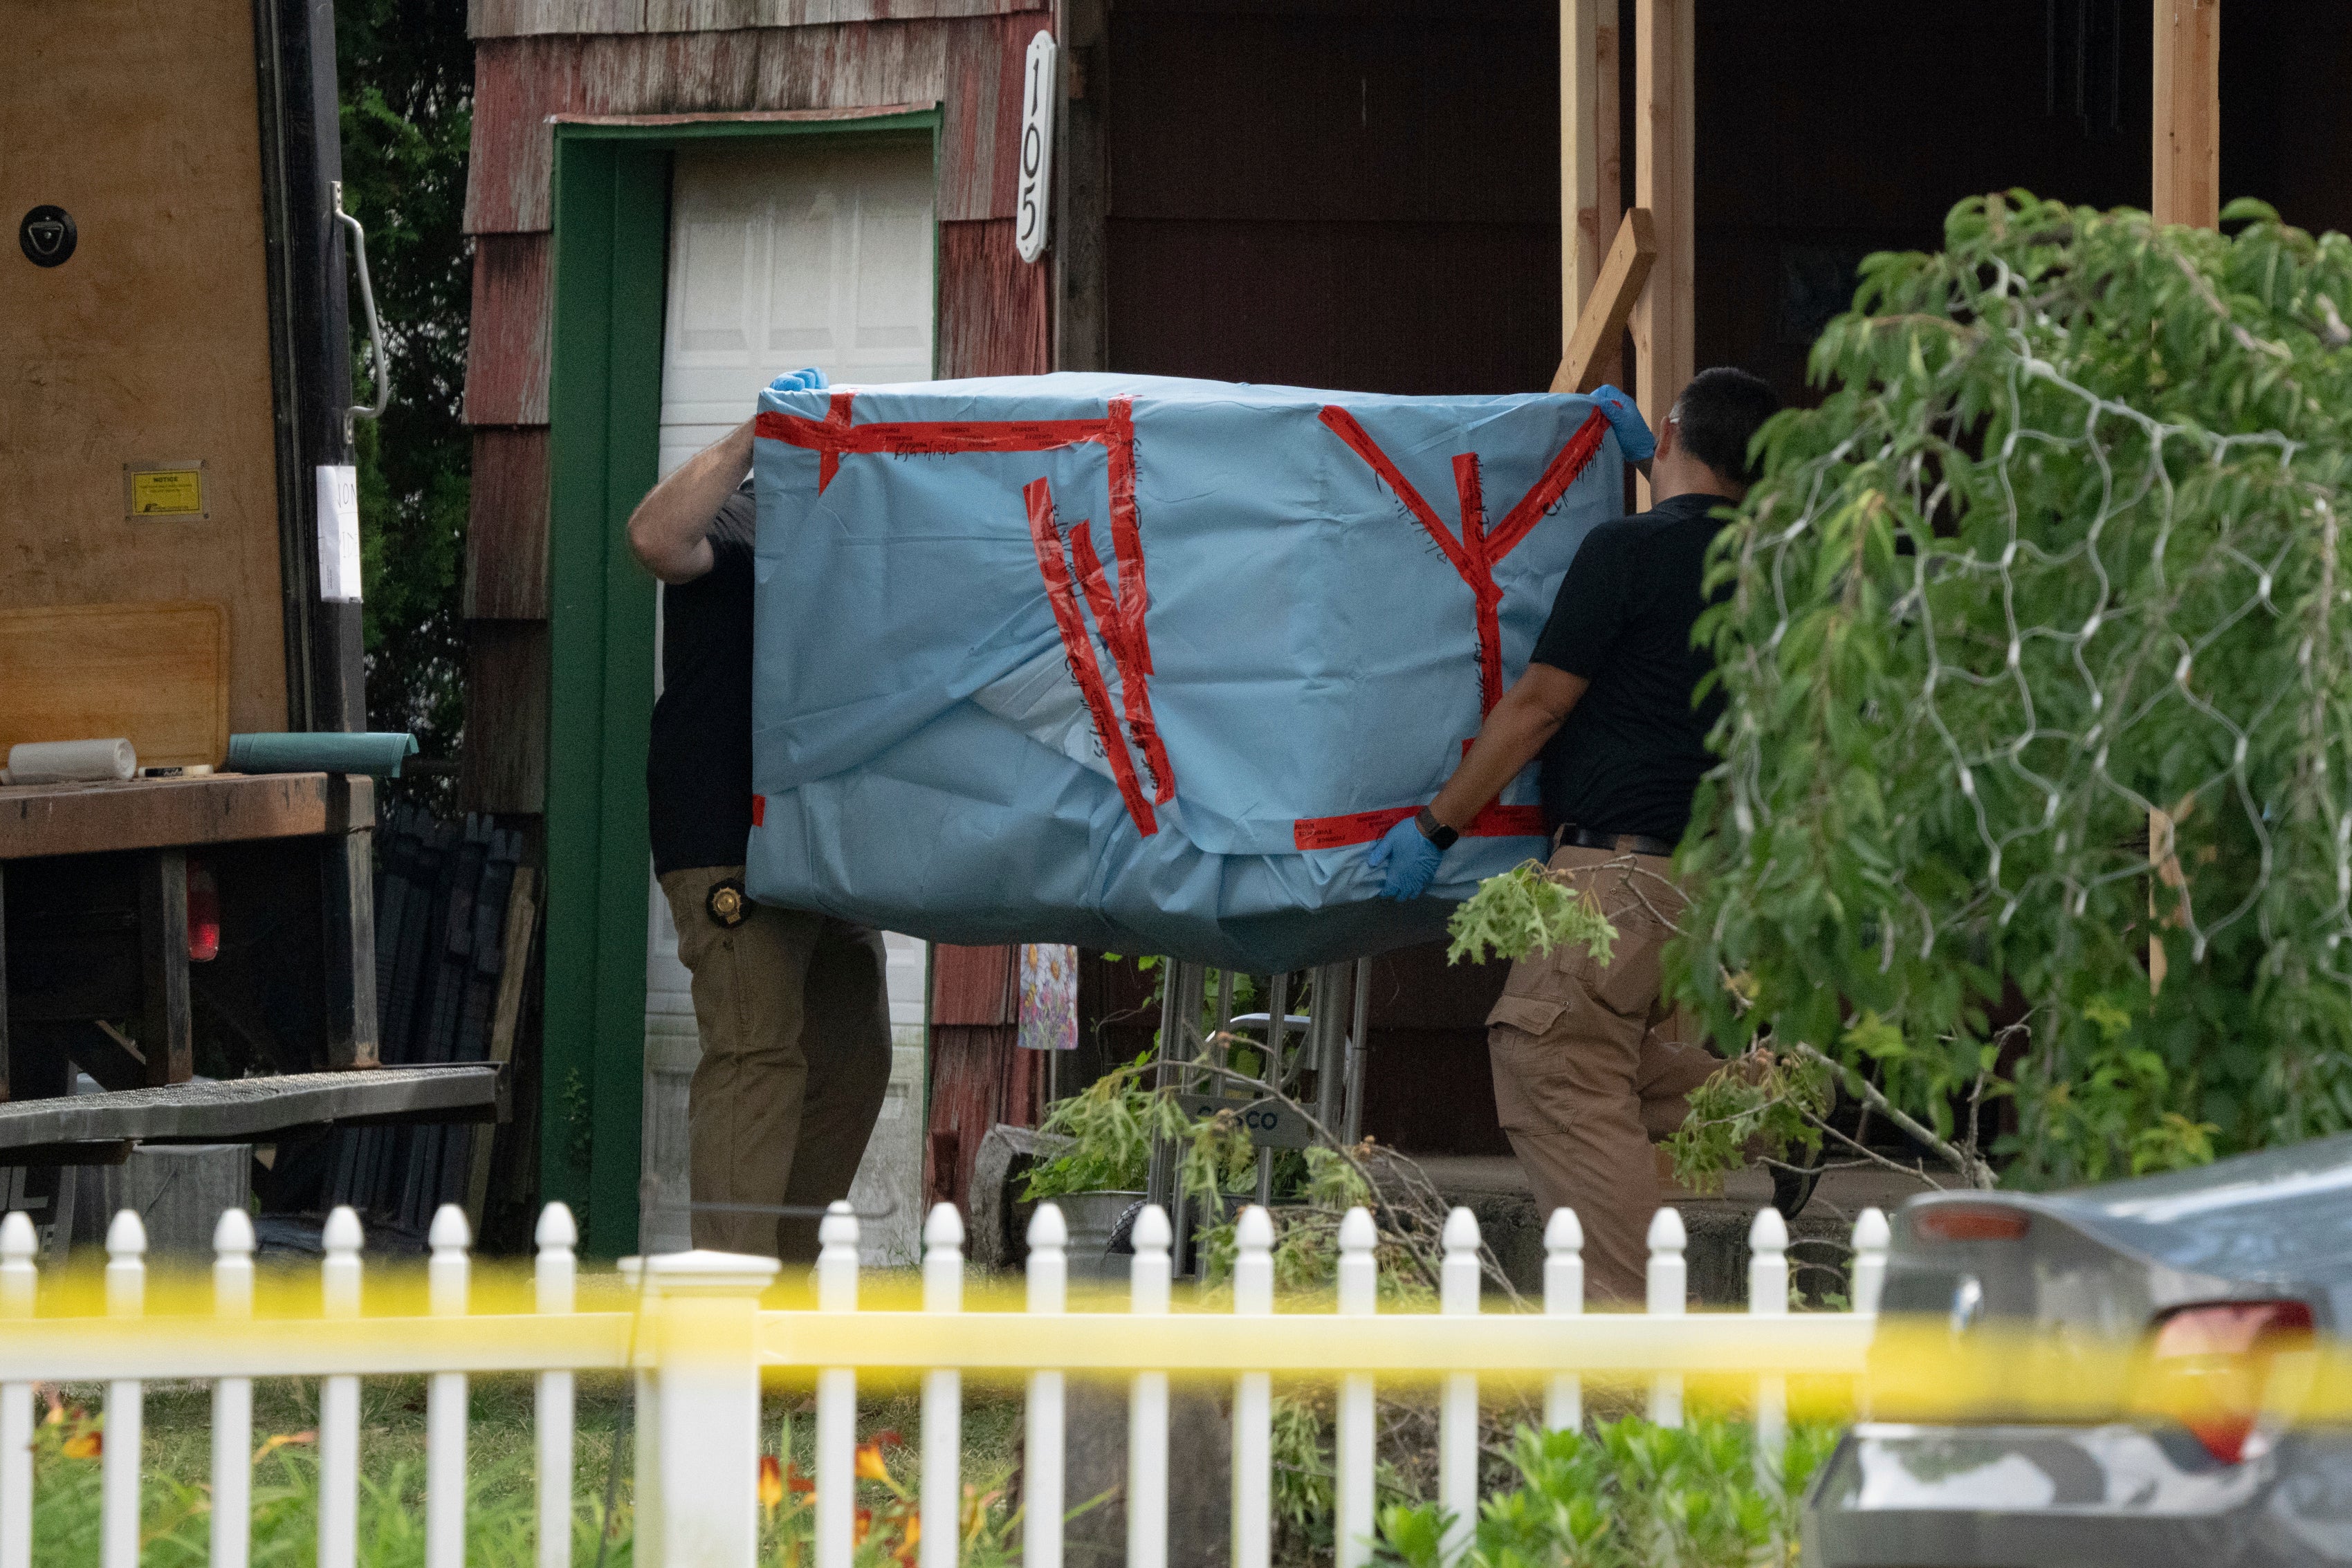 New York State police officers carry out a large item as law enforcement searches the home of Rex Heuermann, Saturday, July 15, 2023, in Massapequa Park, N.Y.